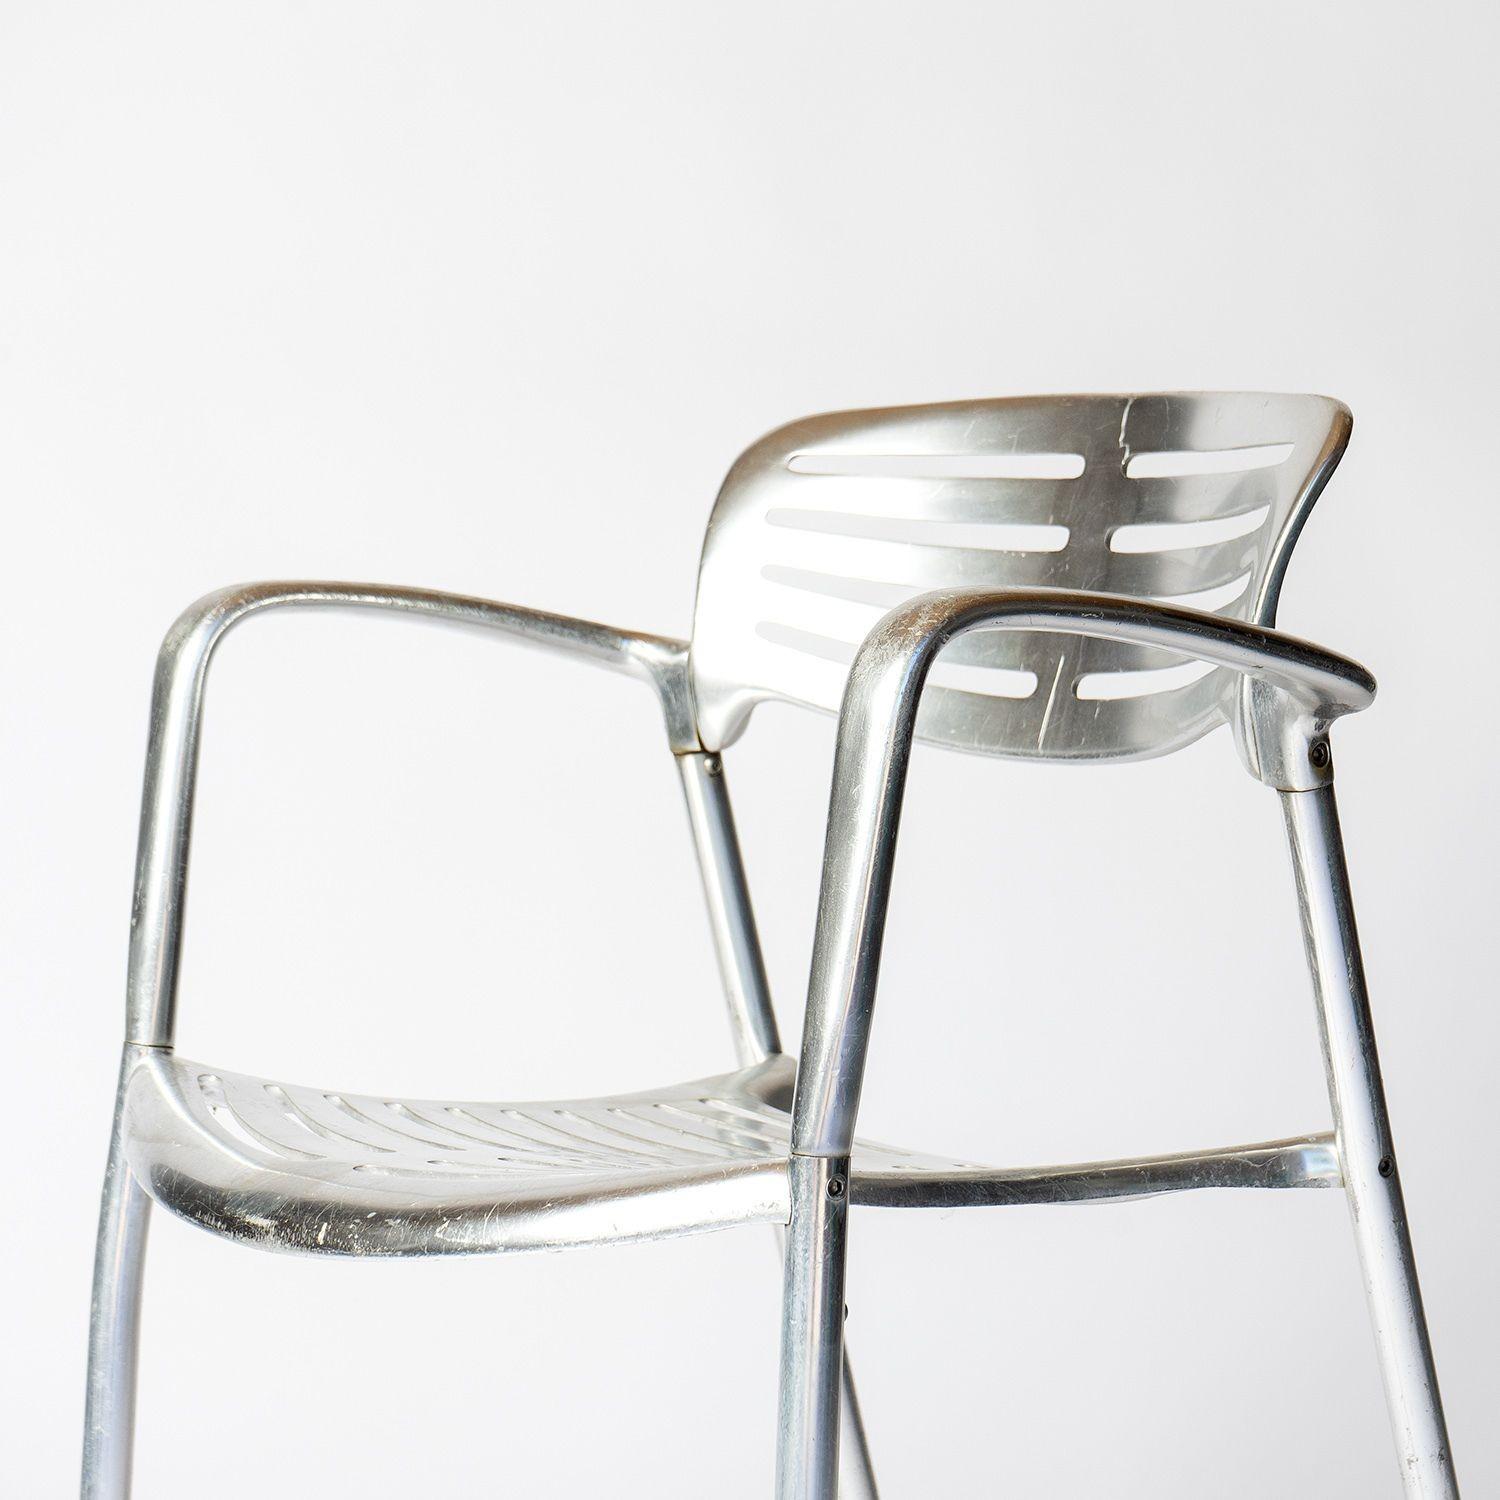 Vintage aluminum dining chair
An iconic award-winning design by Spanish designer Jorge Pensi.
 
Jaw-droppingly beautiful, slightly reminiscent of a car grill or shark gills.
 
Made from cast anodised aluminium.
 
Can be used inside or out.
